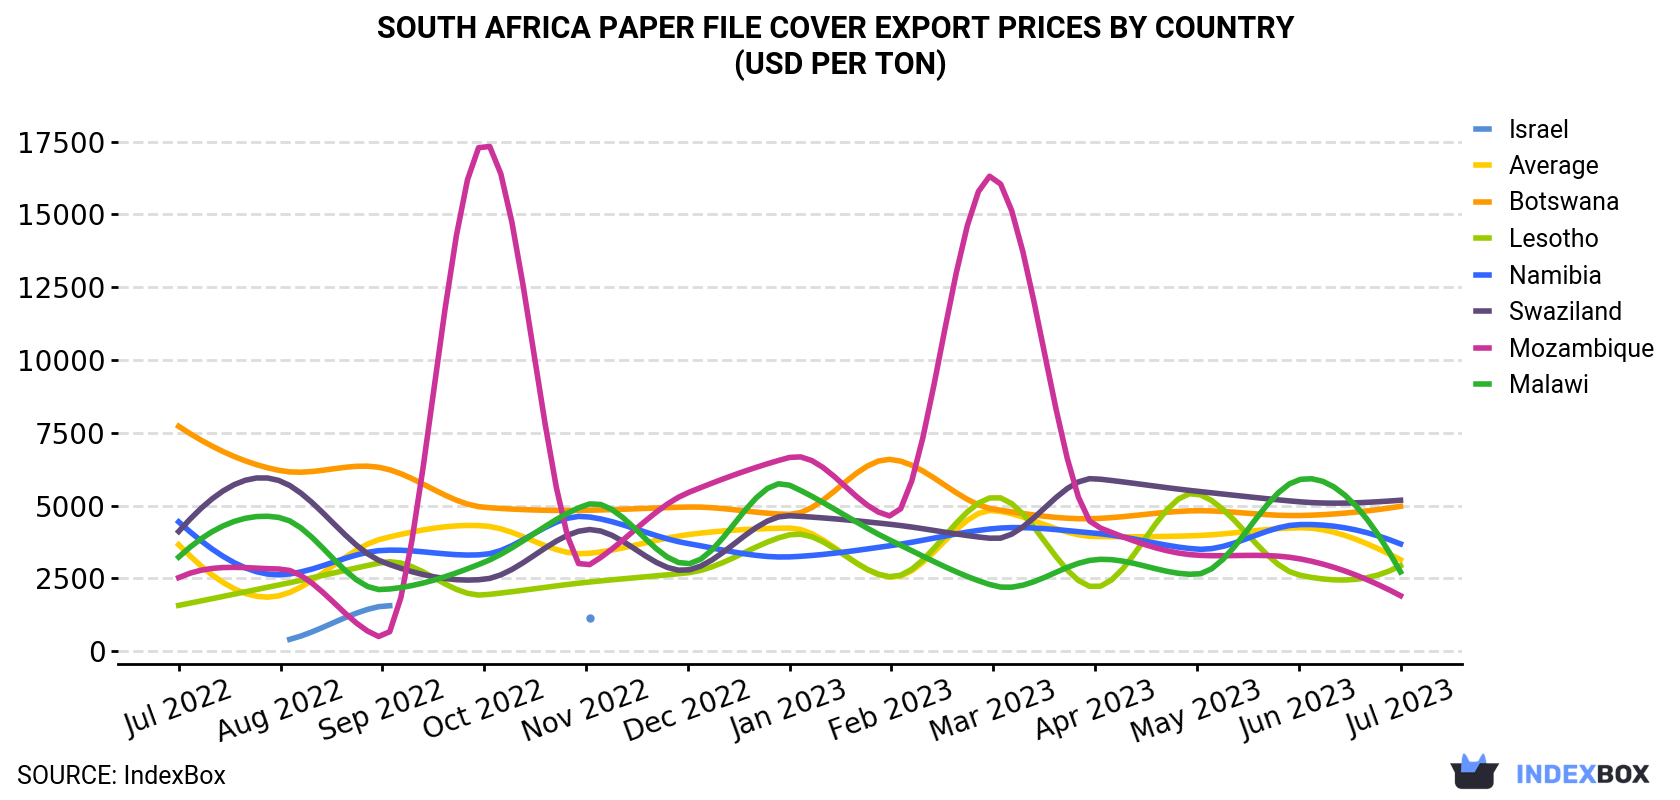 South Africa Paper File Cover Export Prices By Country (USD Per Ton)